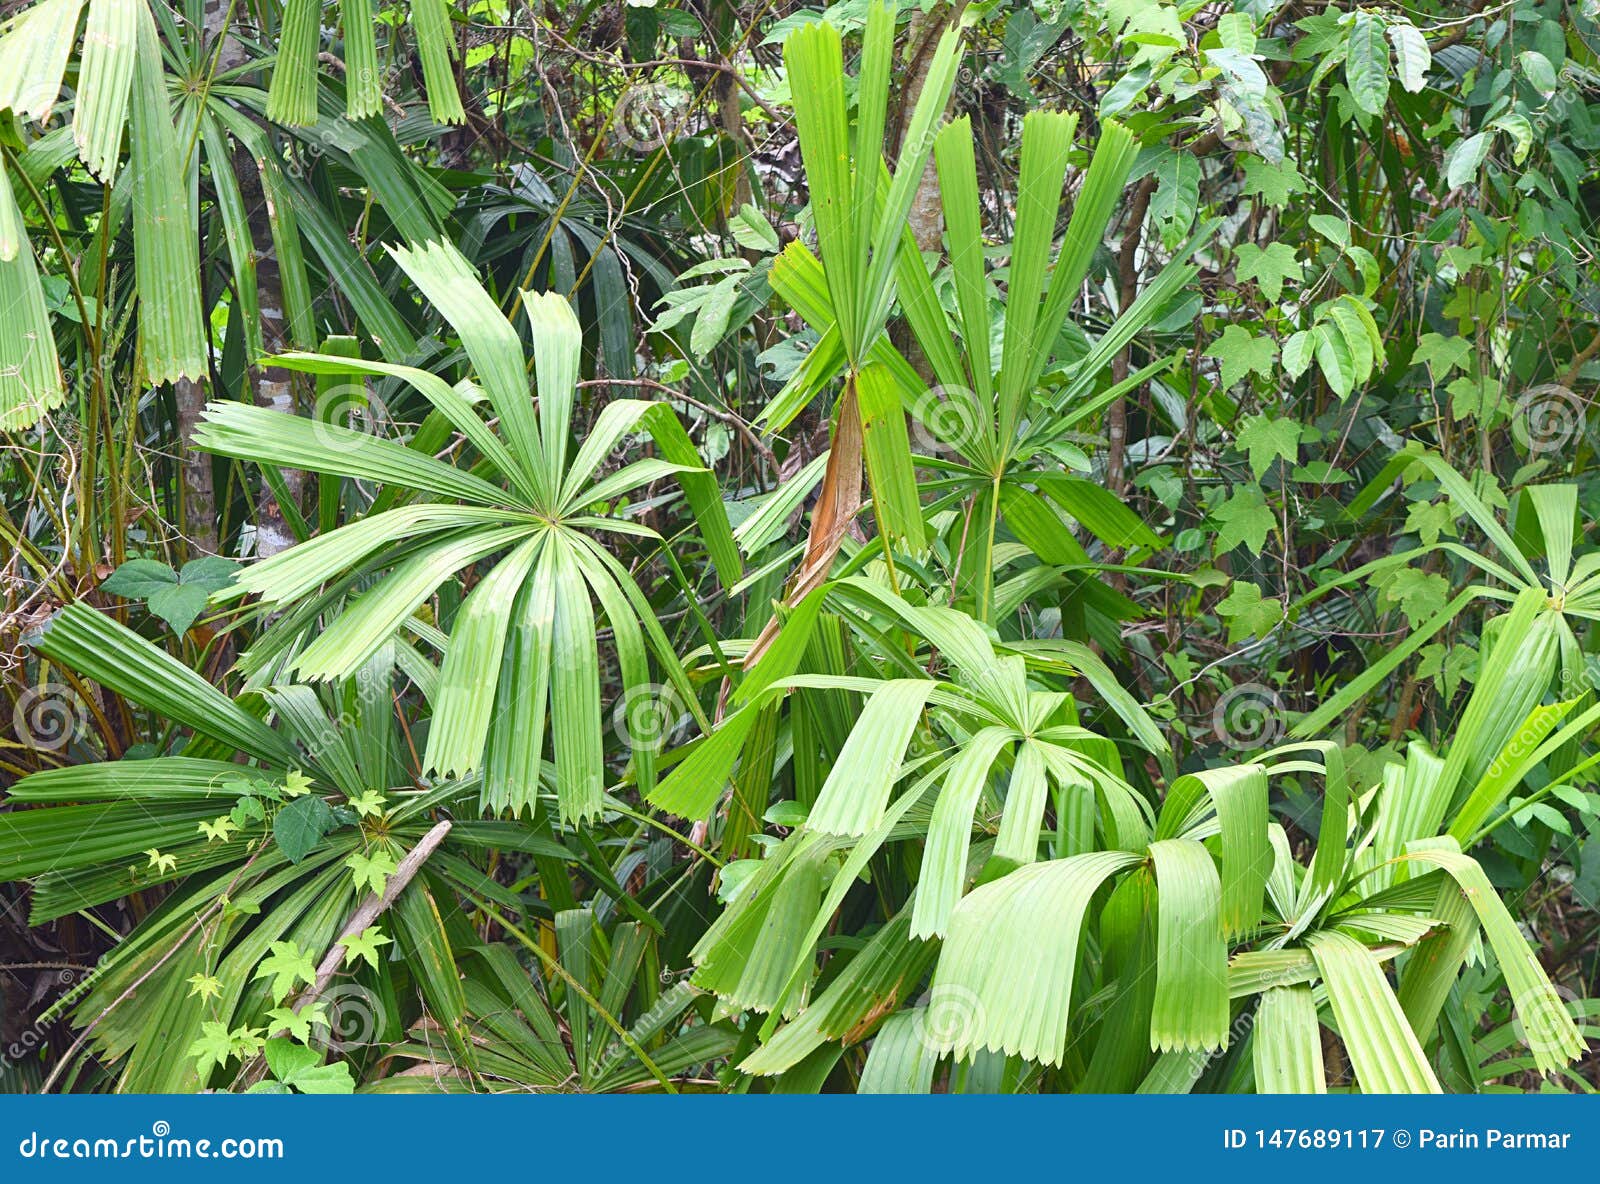 Mangrove Fan Palm Or Good Luck Palm Licuala Spinoa From Arecaceae Family Flora And Forest In Andaman Nicobar Islands India Stock Image Image Of Ecology Circular